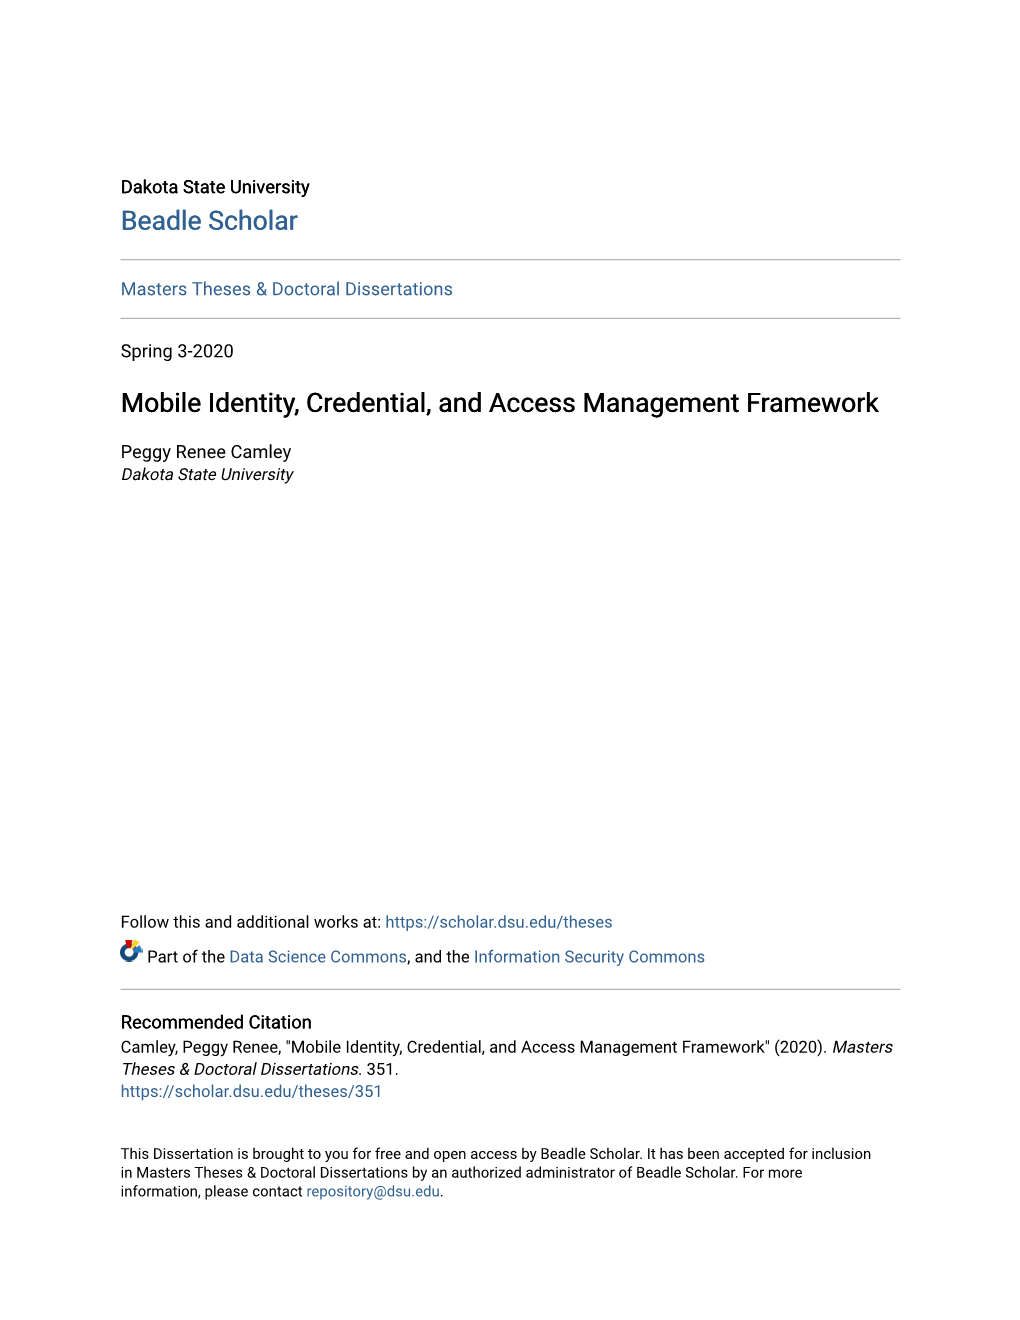 Mobile Identity, Credential, and Access Management Framework